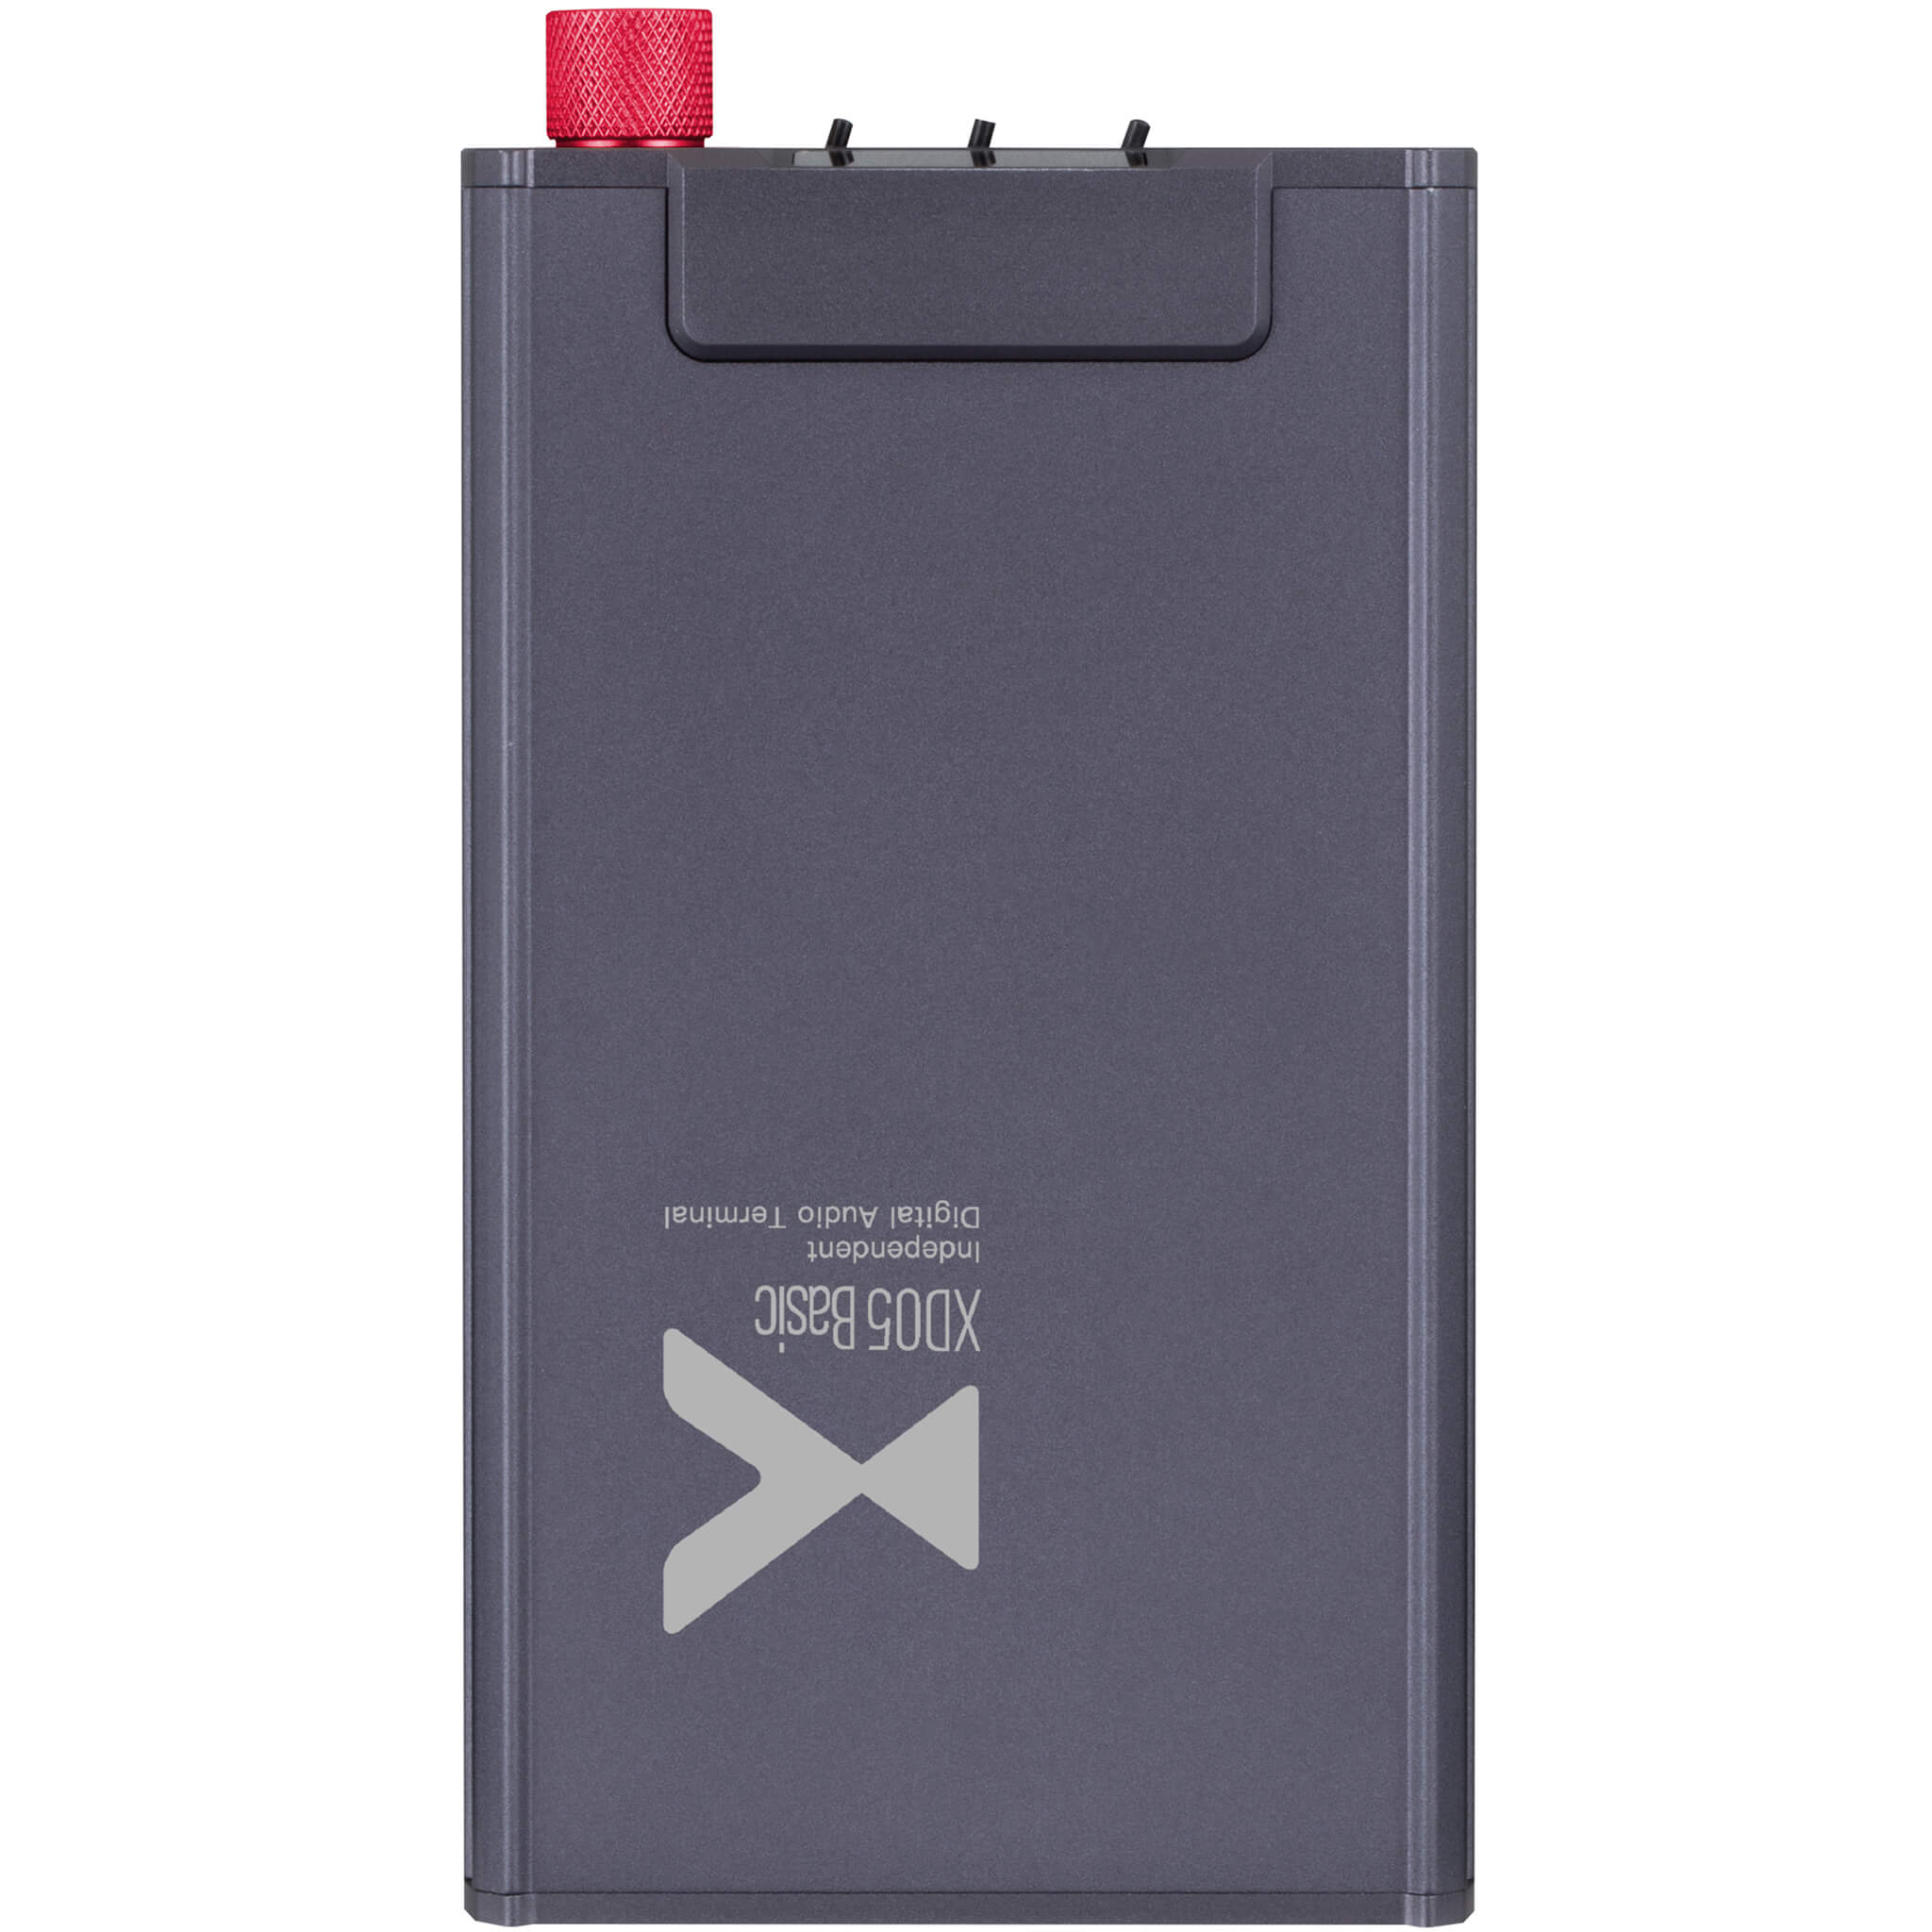 Buy xDuoo XD-05 Basic Headphone Amplifiers at HiFiNage in India with warranty.